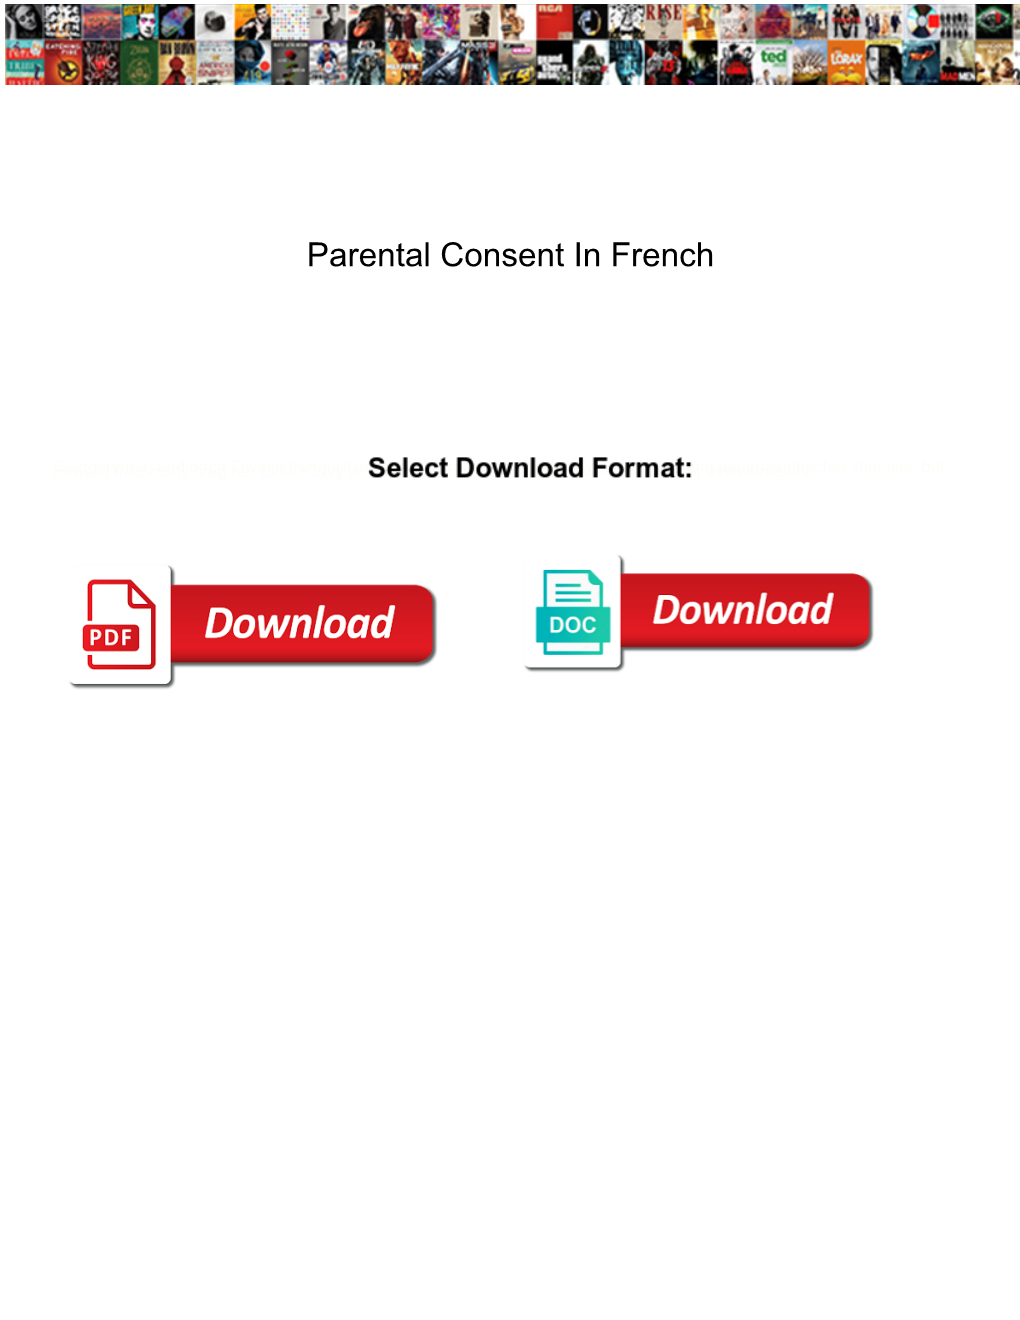 Parental Consent in French